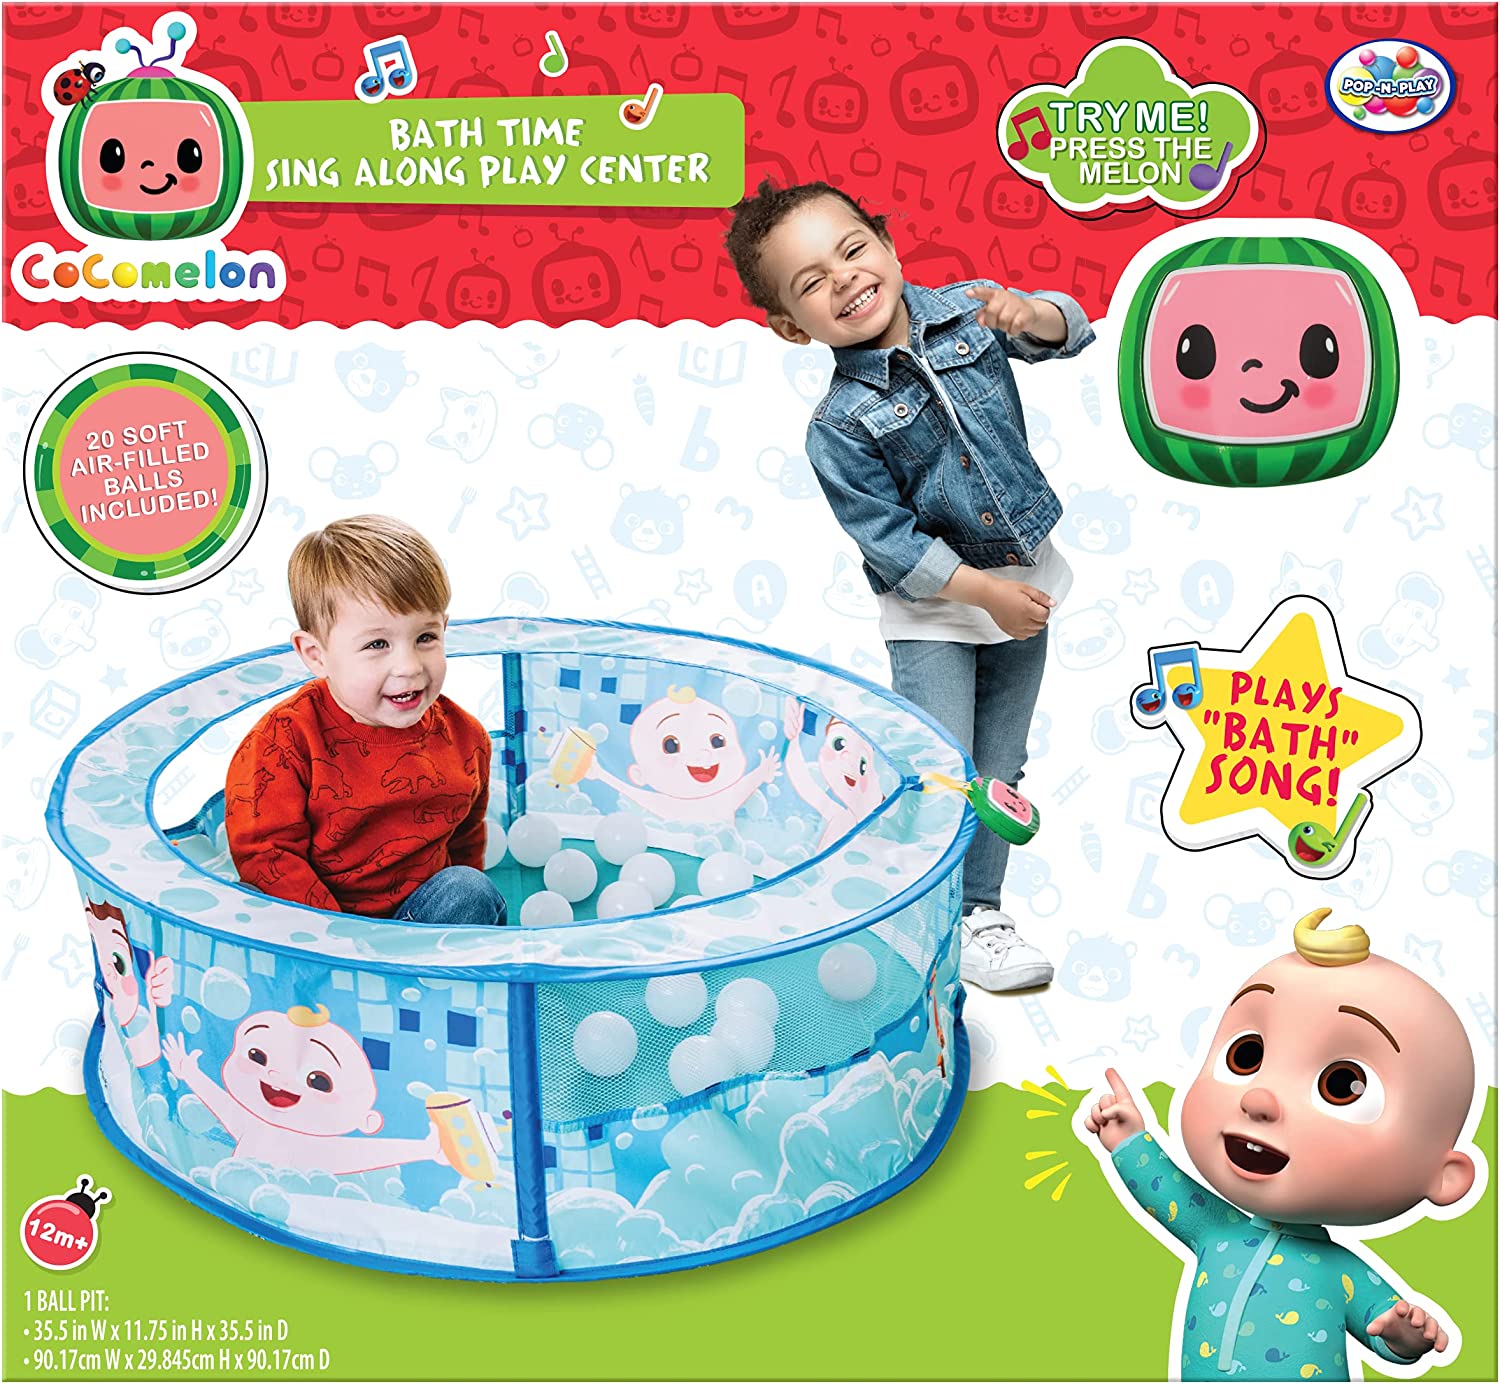 Sunny Days Entertainment CoComelon Bath Time Sing Along Musical Ball Pit w/ 20 Play Balls $11.90 + FS w/ Amazon Prime or FS on $25+